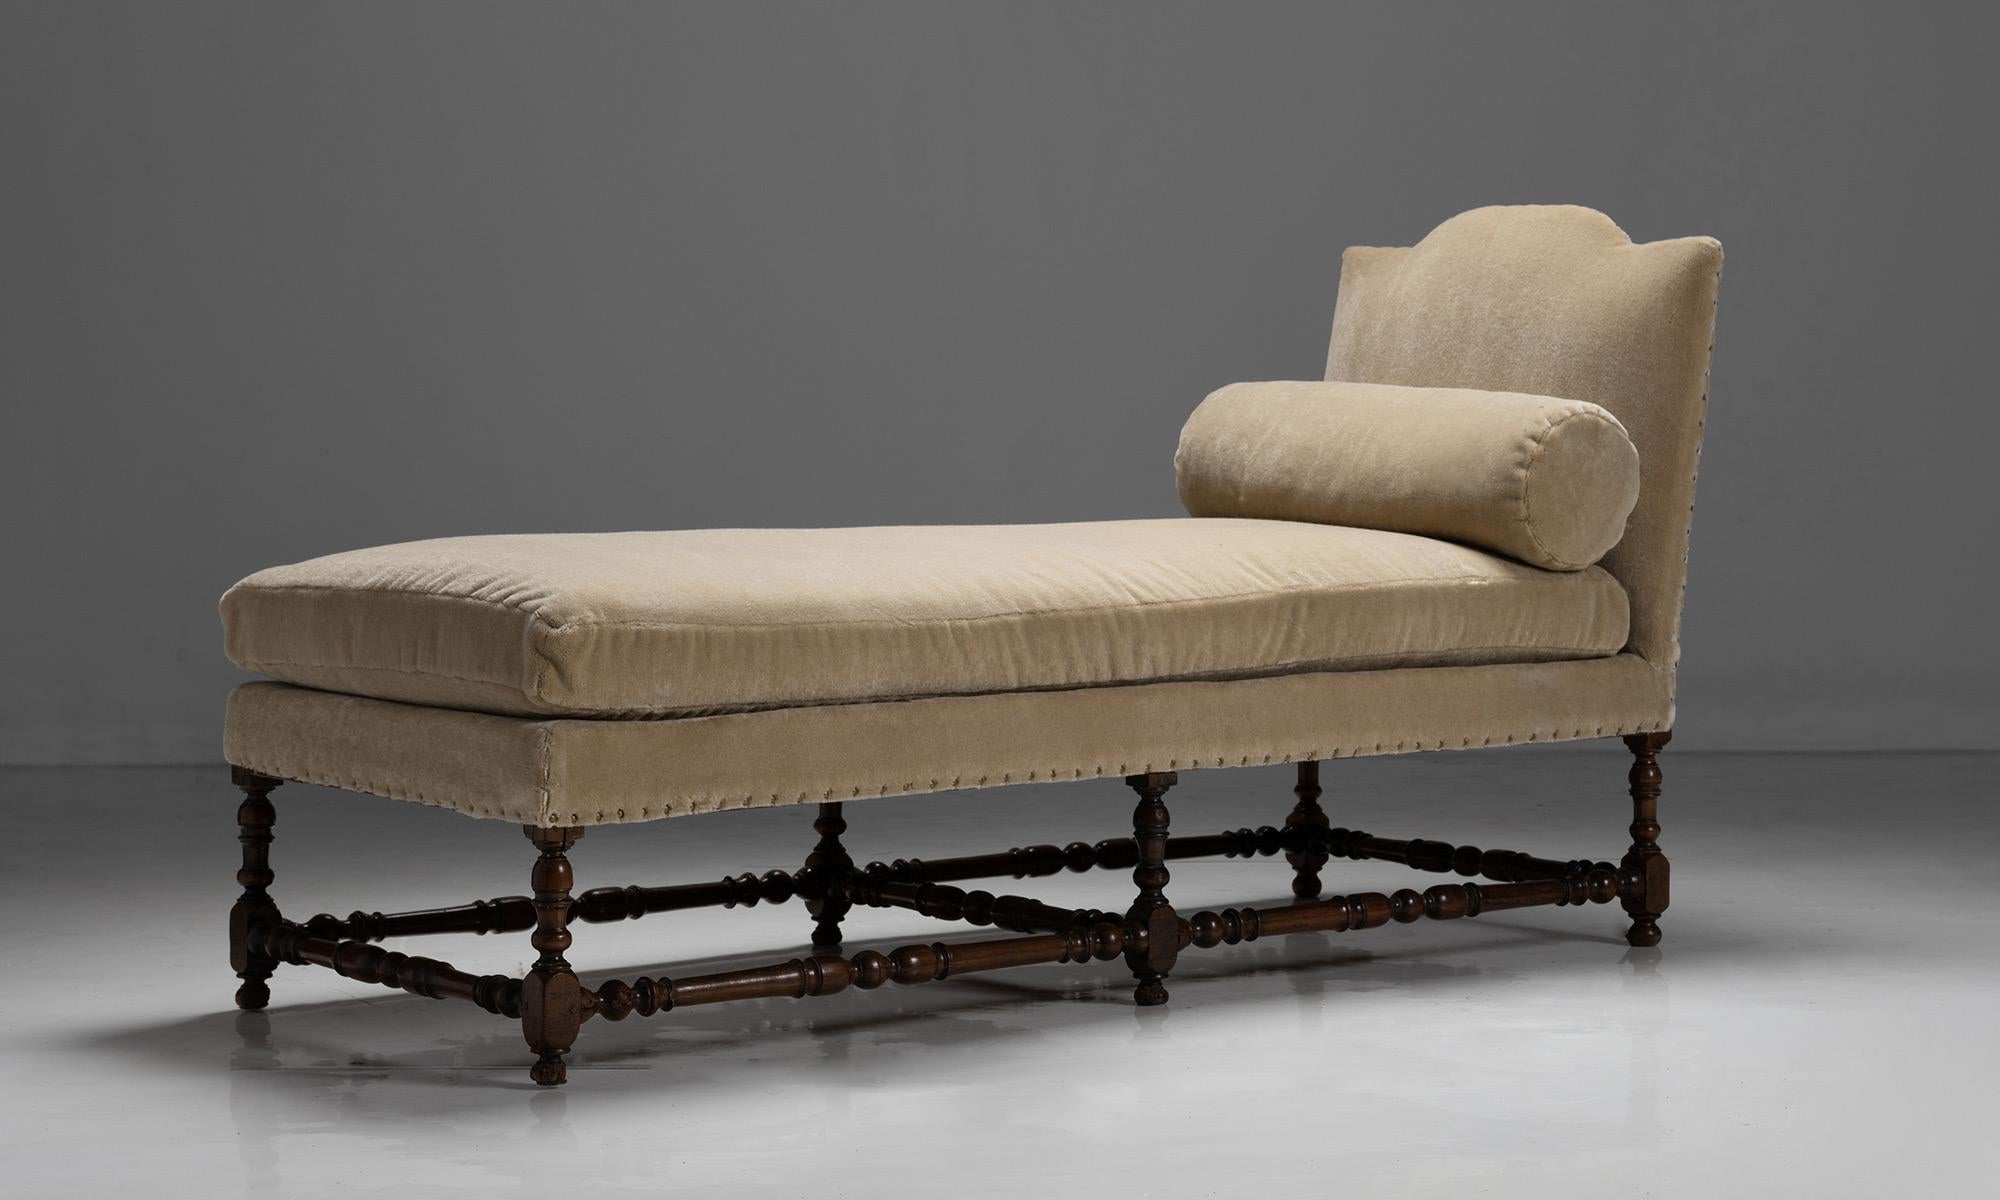 Extra Long French daybed newly covered in Teddy Mohair by Pierre Frey

France circa 1800

Measures: 74”w x 30”d x 40”h x 22”seat.